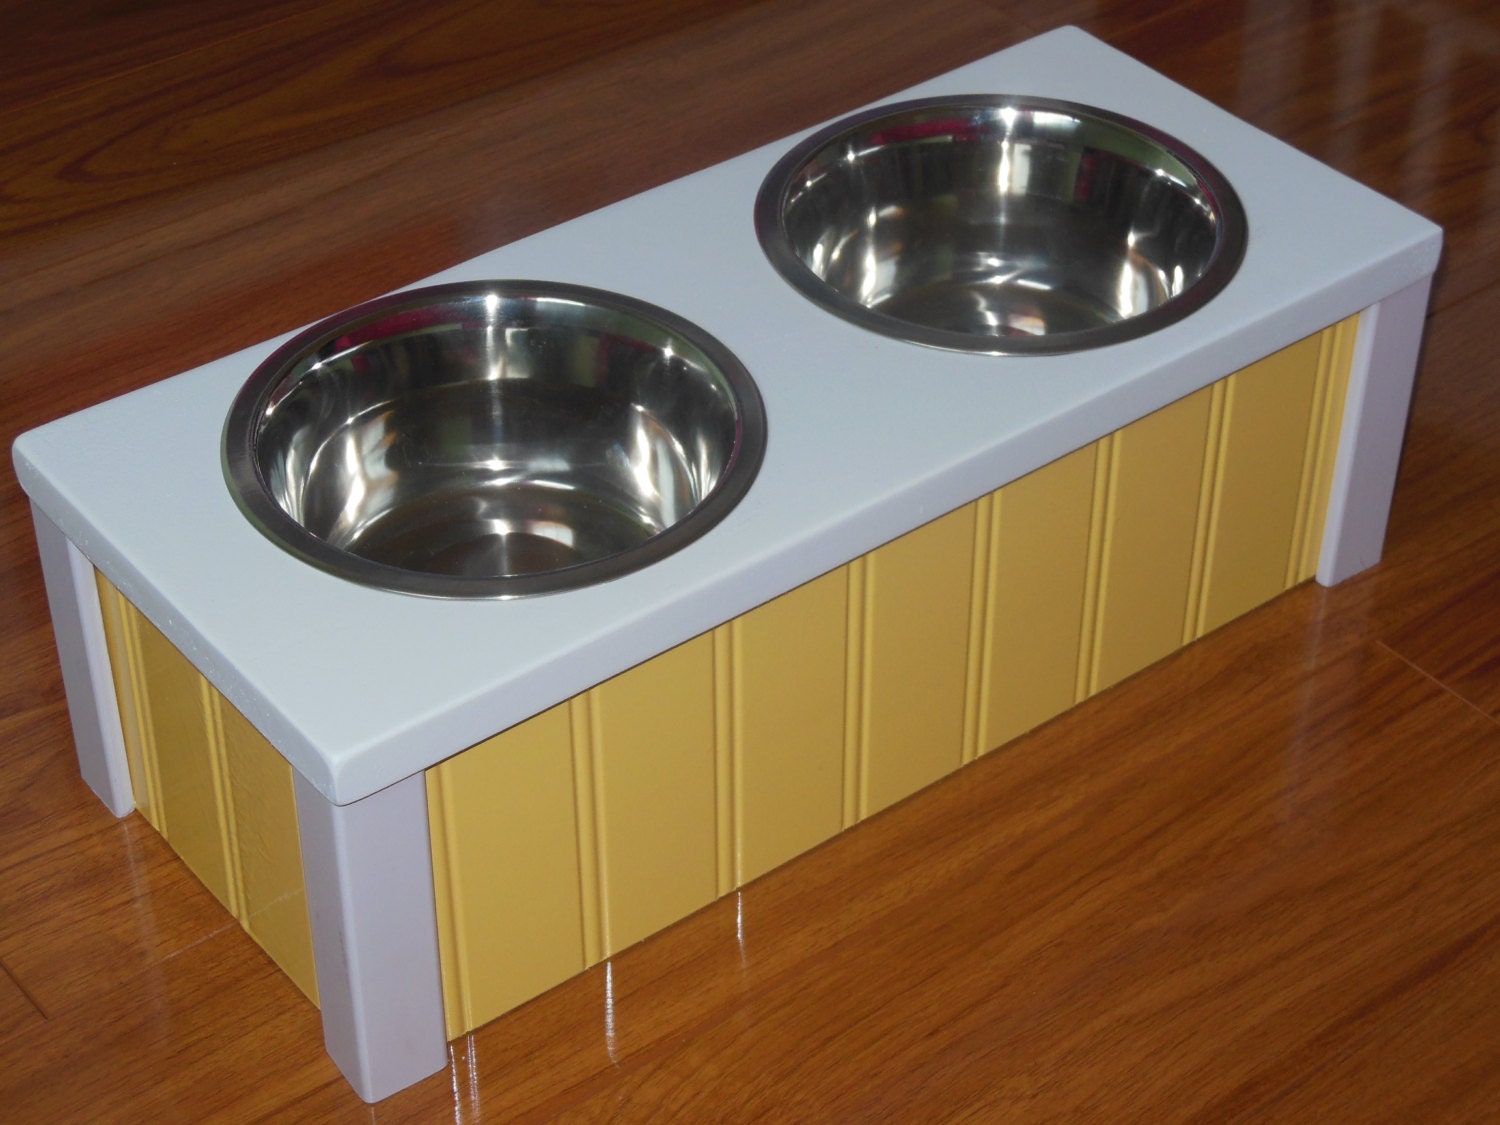 elevated dog feeder for large dogs